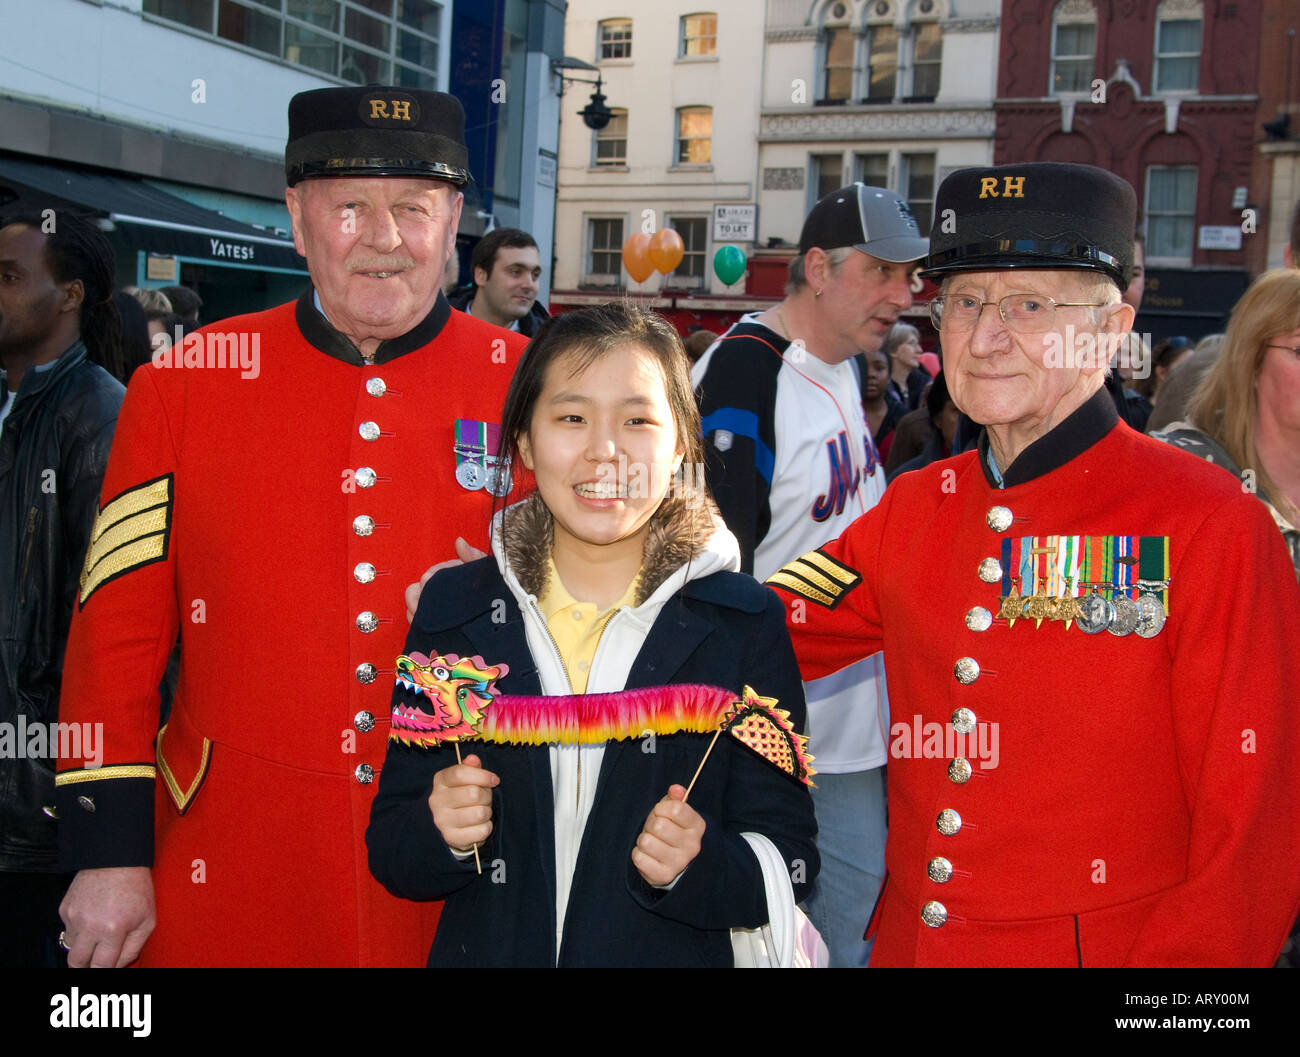 A Korean tourist in London at the Chinese New Year posing for photographs with two Chelsea pensioners Stock Photo